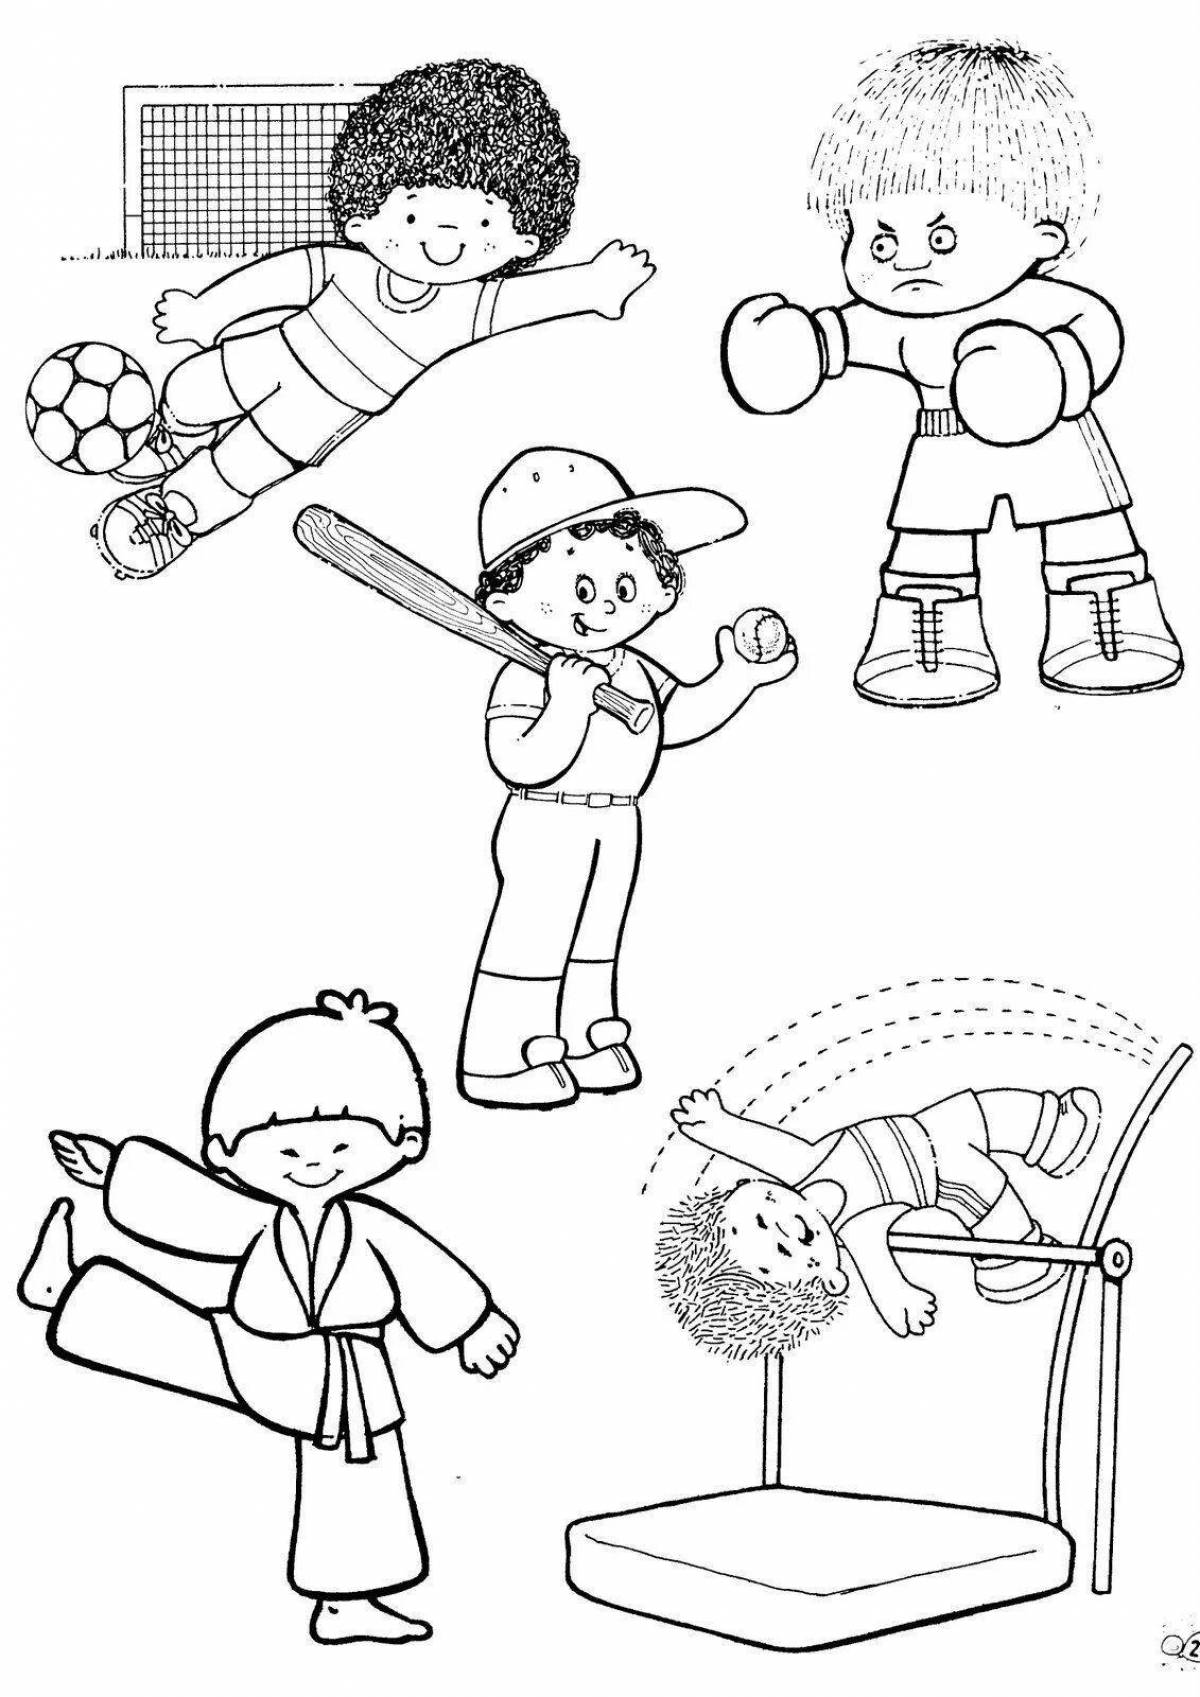 Athletes of different sports for children #4